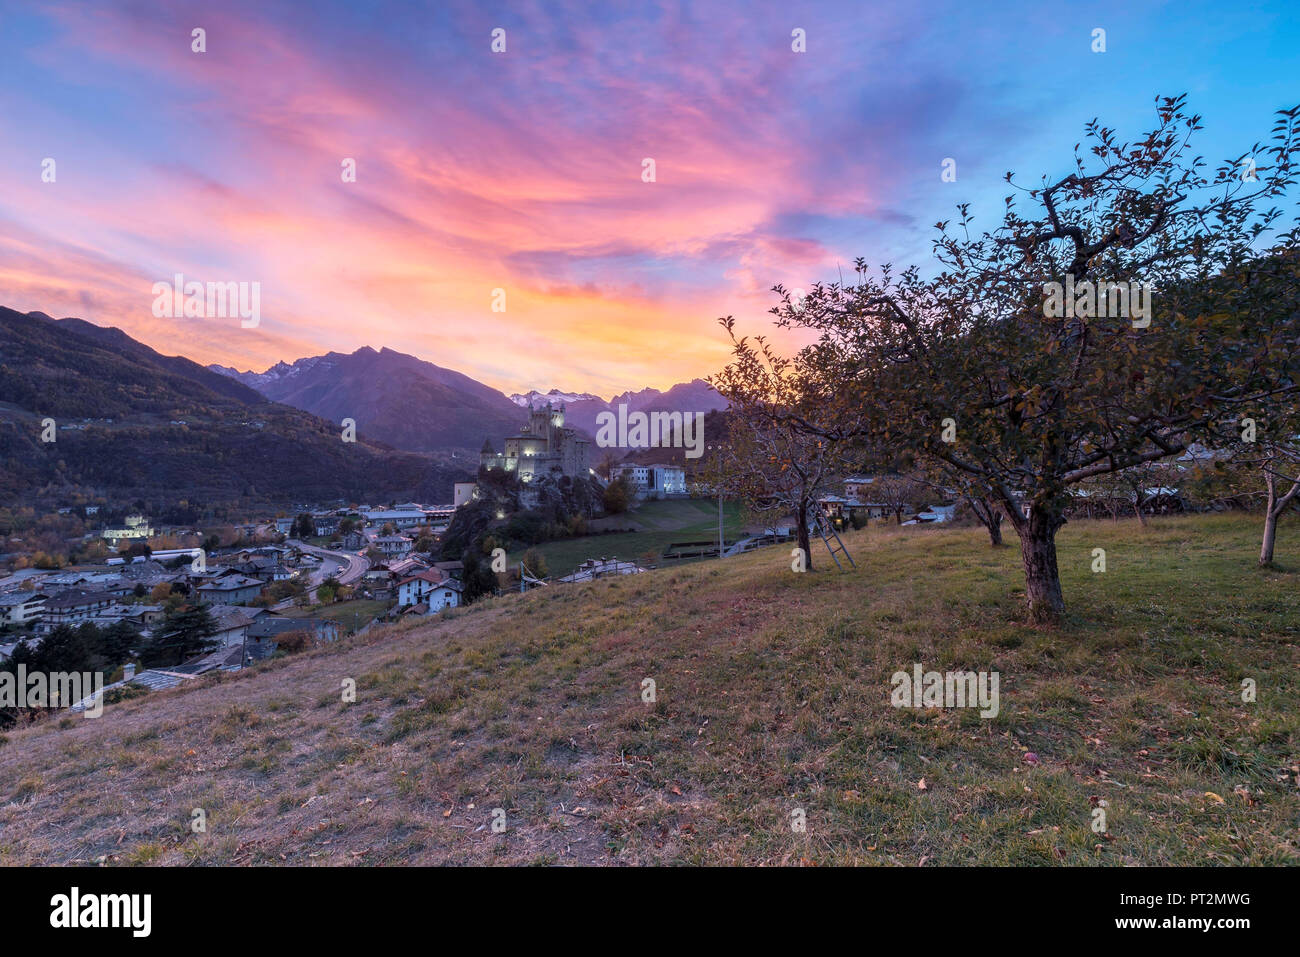 Colorful sunset among the apple orchard overlooking the Castle of Saint-Pierre, Aosta Valley, Italy Stock Photo